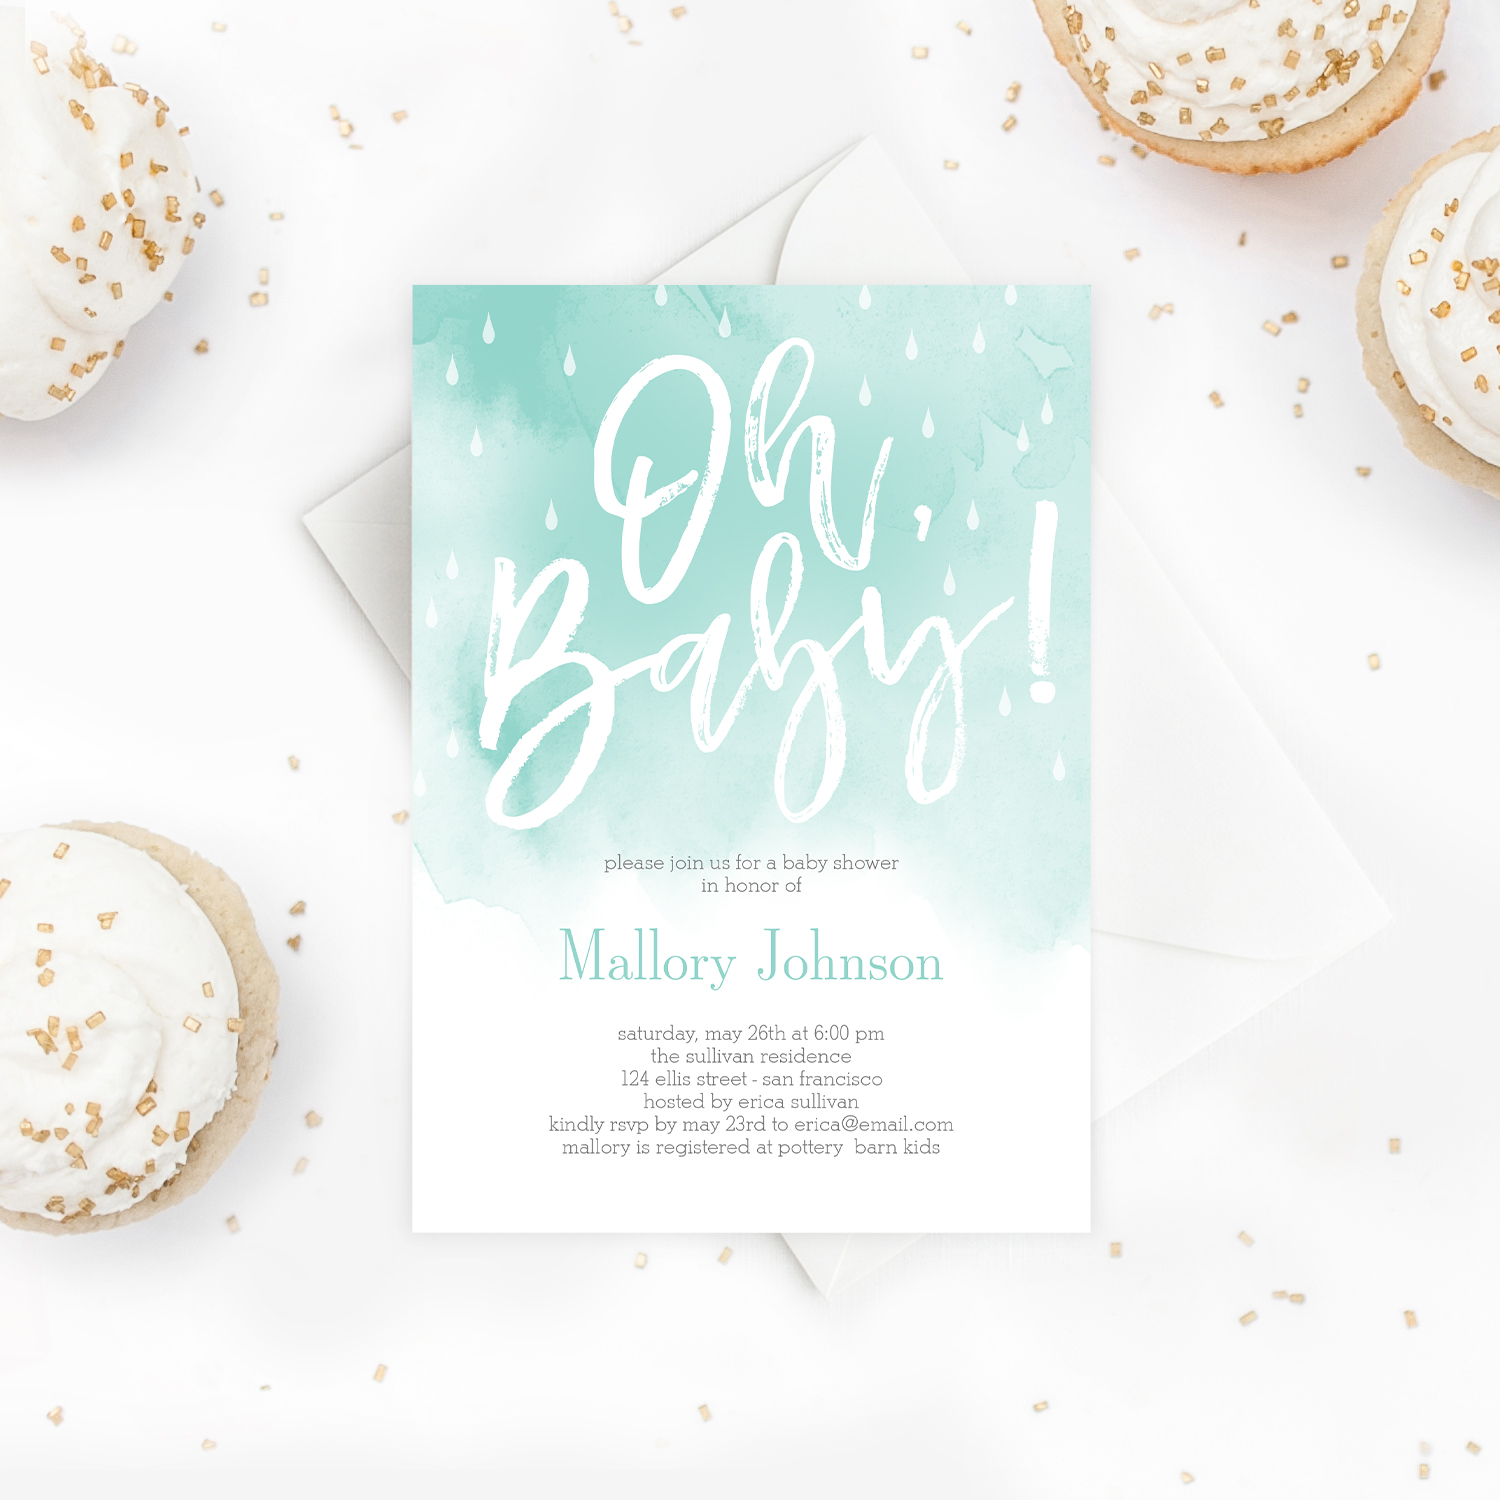 Oh Baby Watercolor Bridal Shower Invitation Mint Blue 